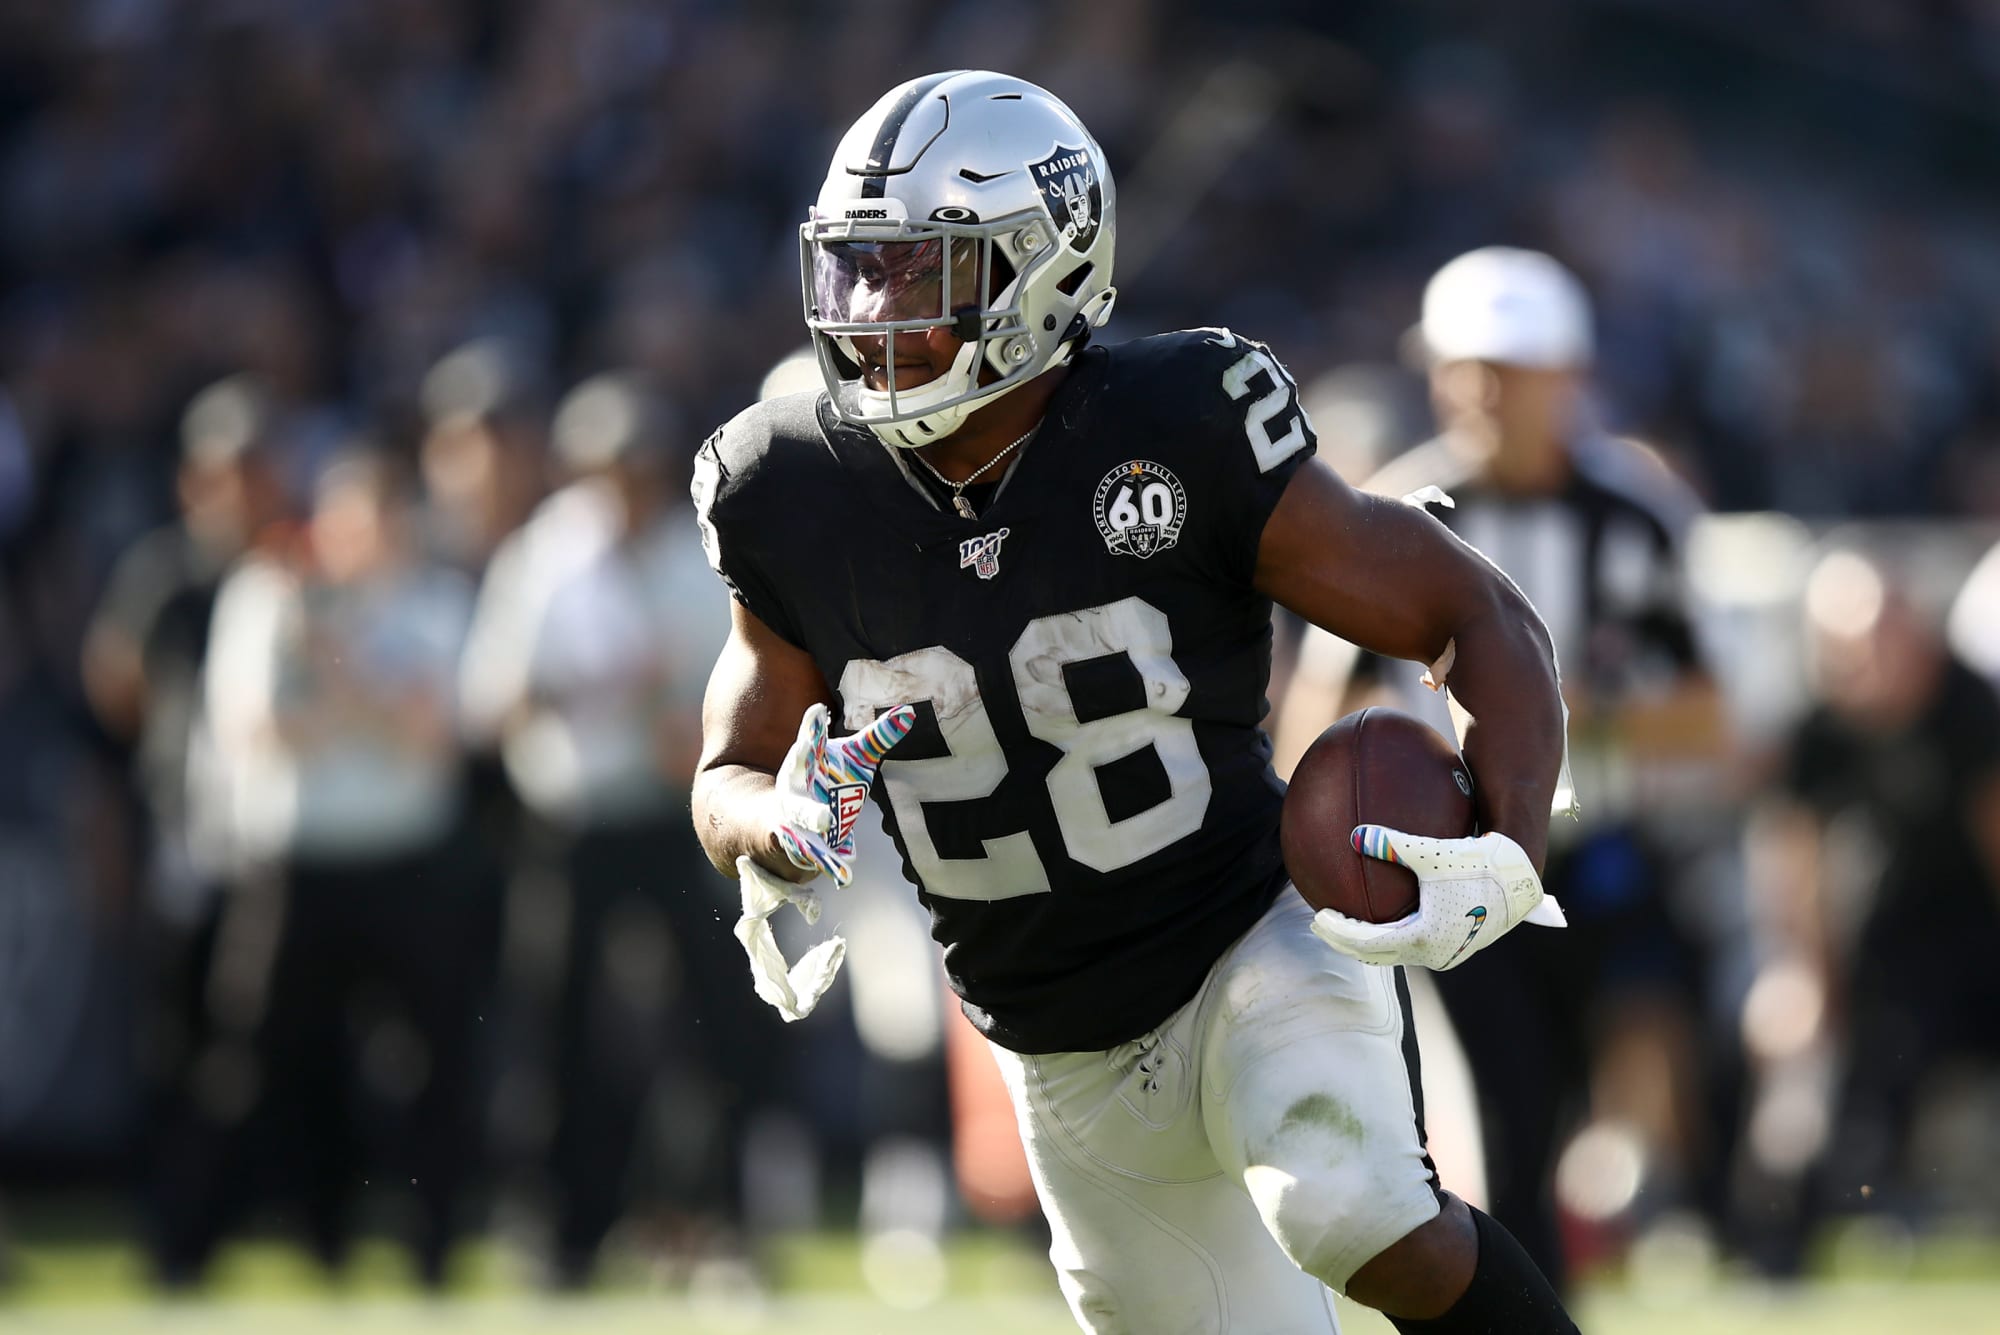 Raiders running back Josh Jacobs could prove to be an elite fantasy option